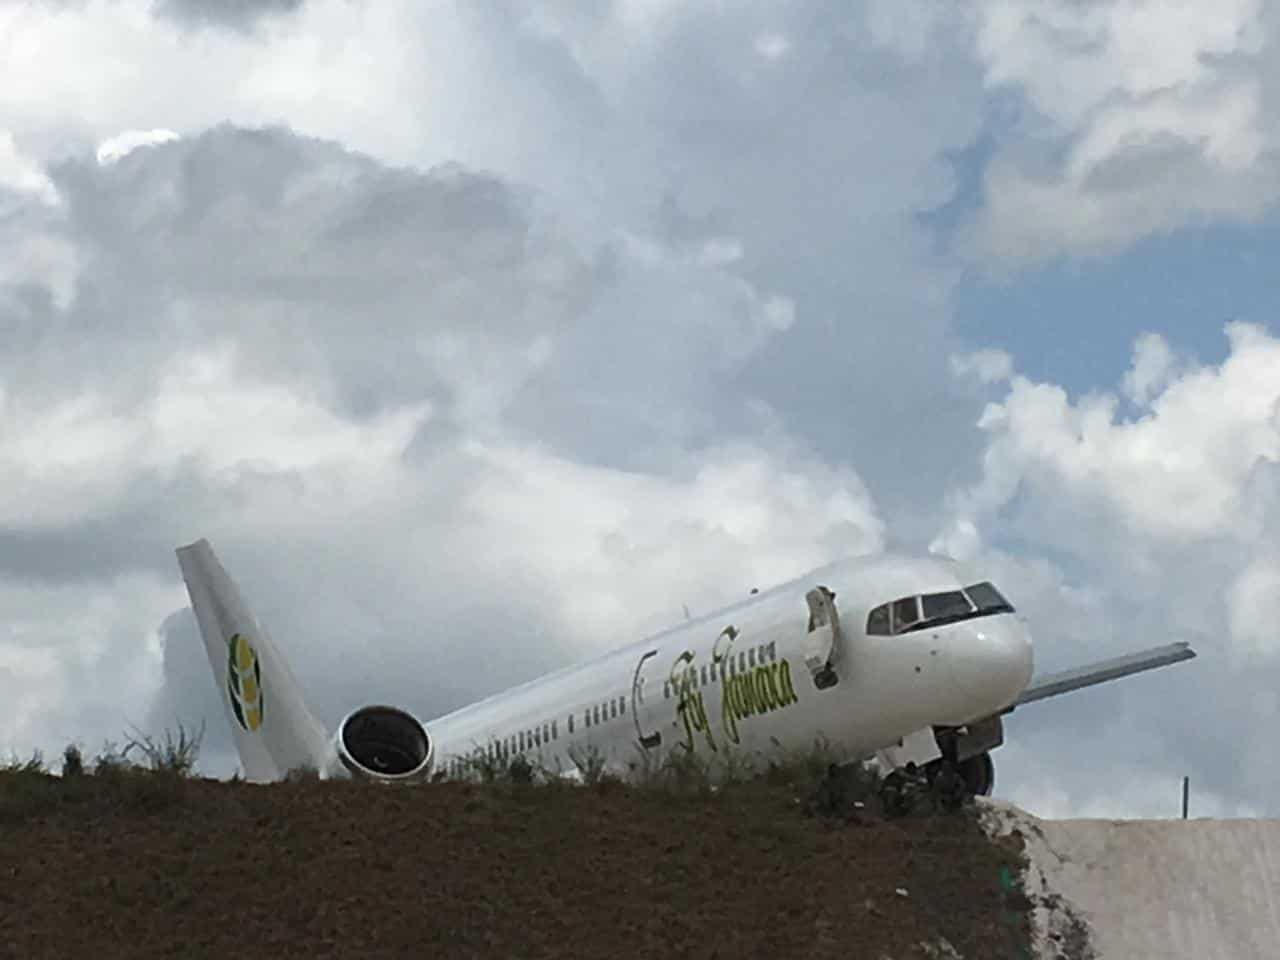 Fly Jamaica Aircraft Accident: 19-year-old plane